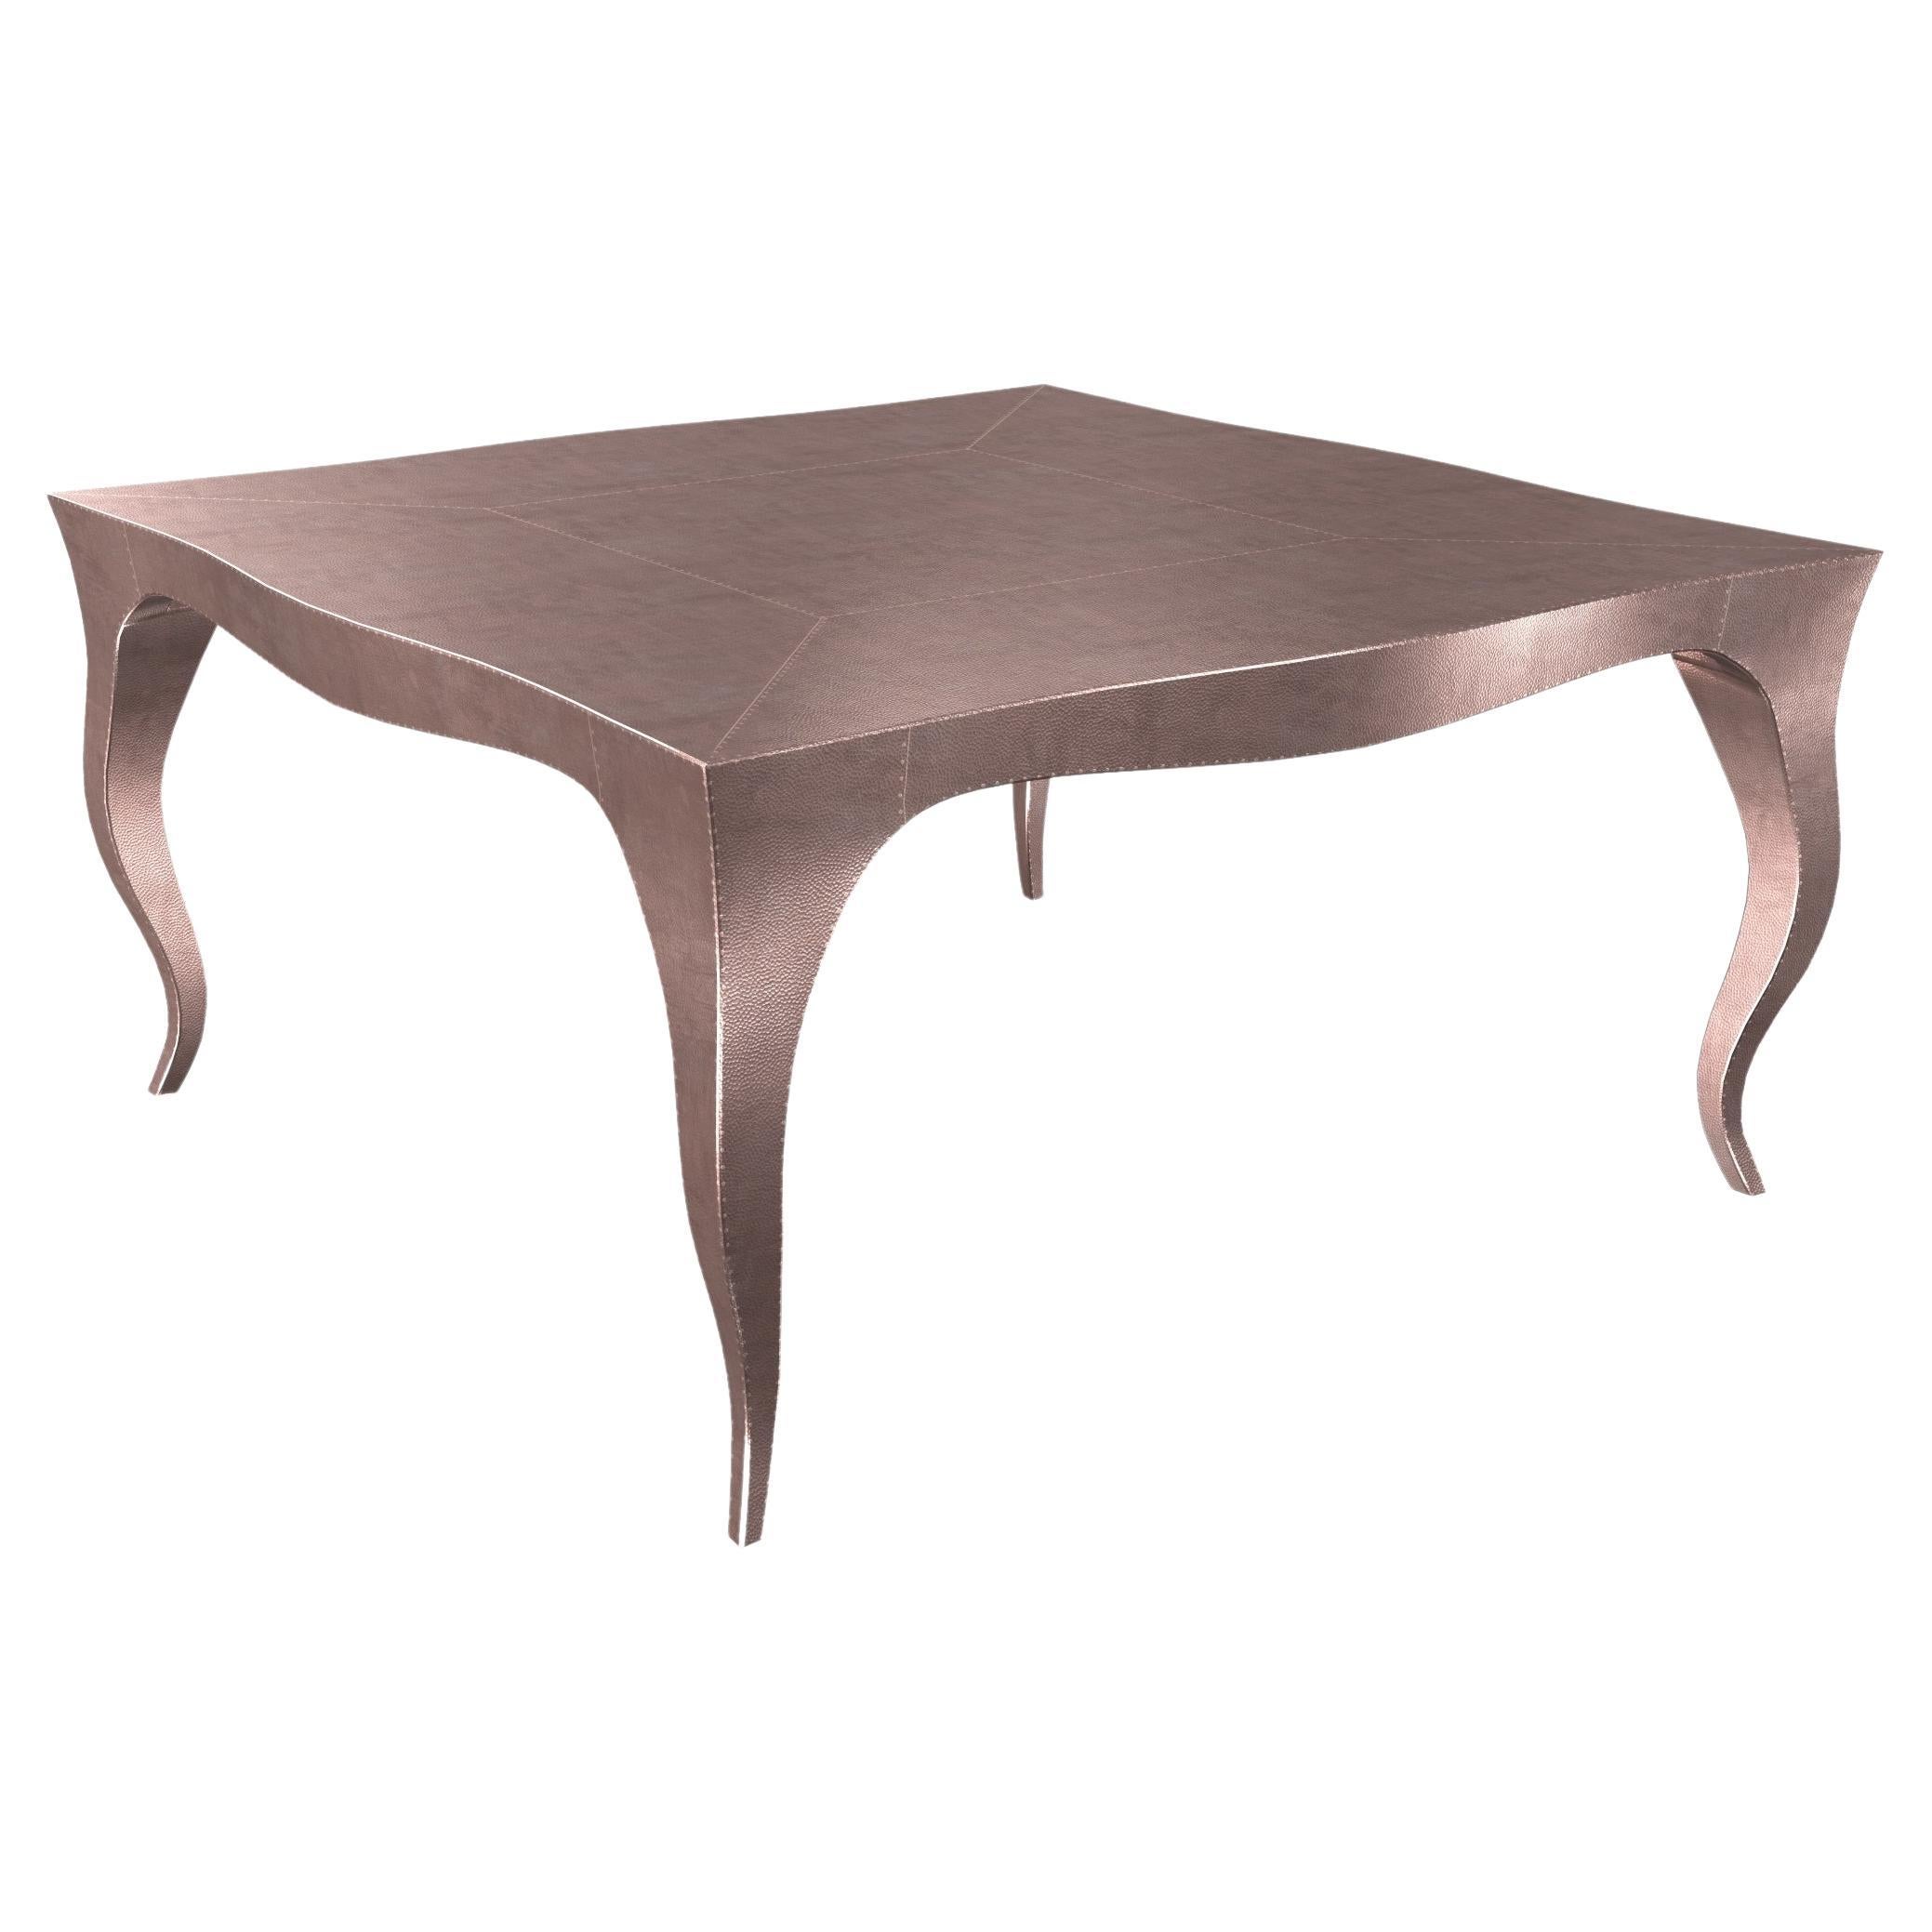 Louise Art Deco Coffee and Cocktail Tables Mid. Hammered Copper by Paul Mathieu For Sale